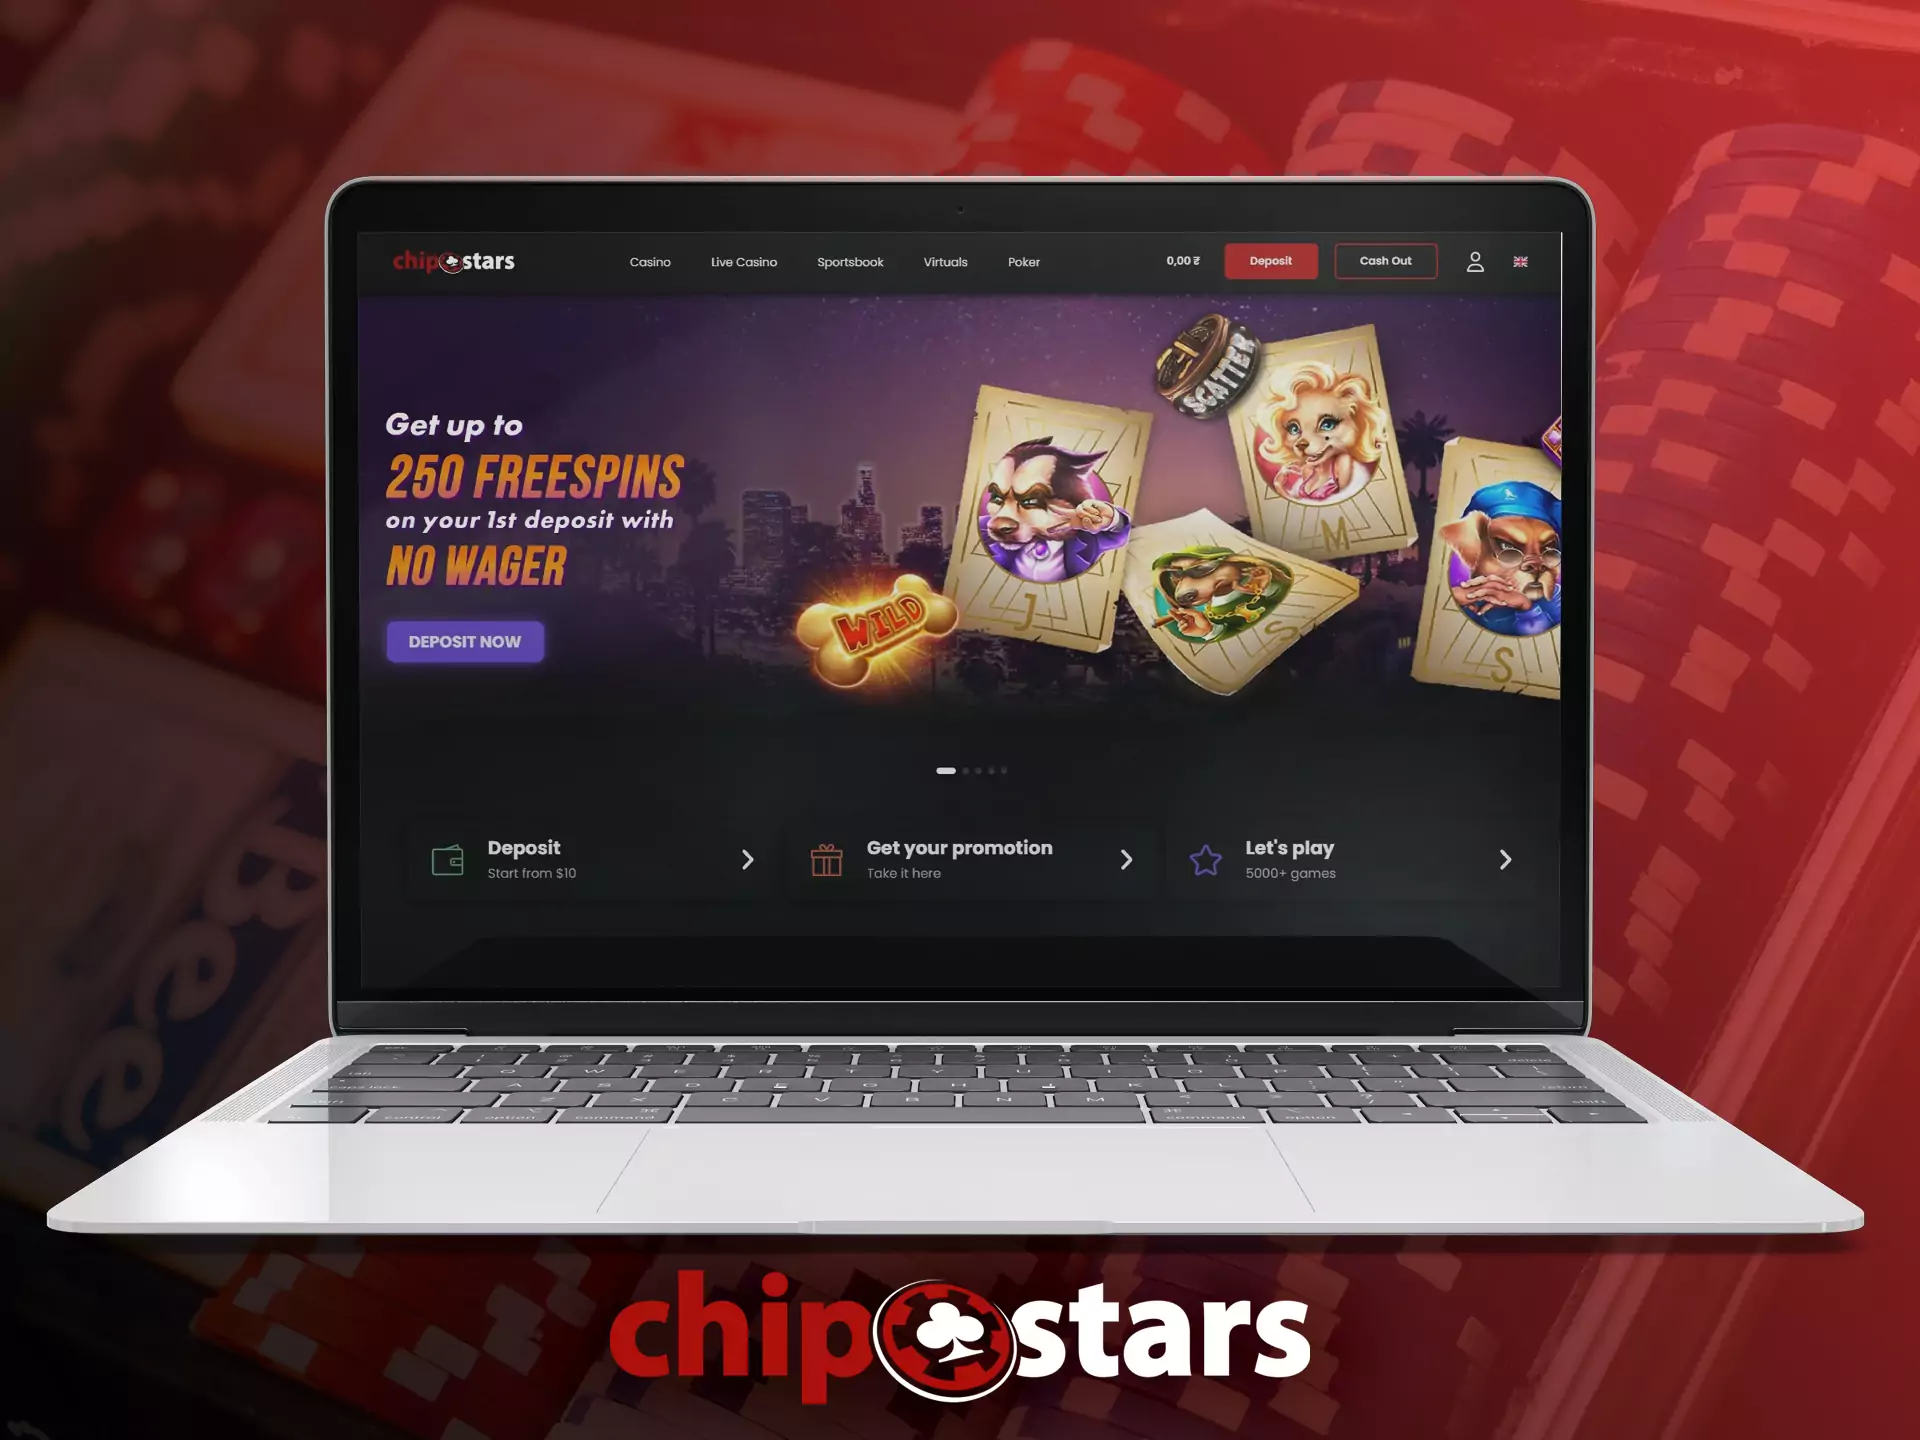 Trust only official sites of Chipstars and avoid fraud.